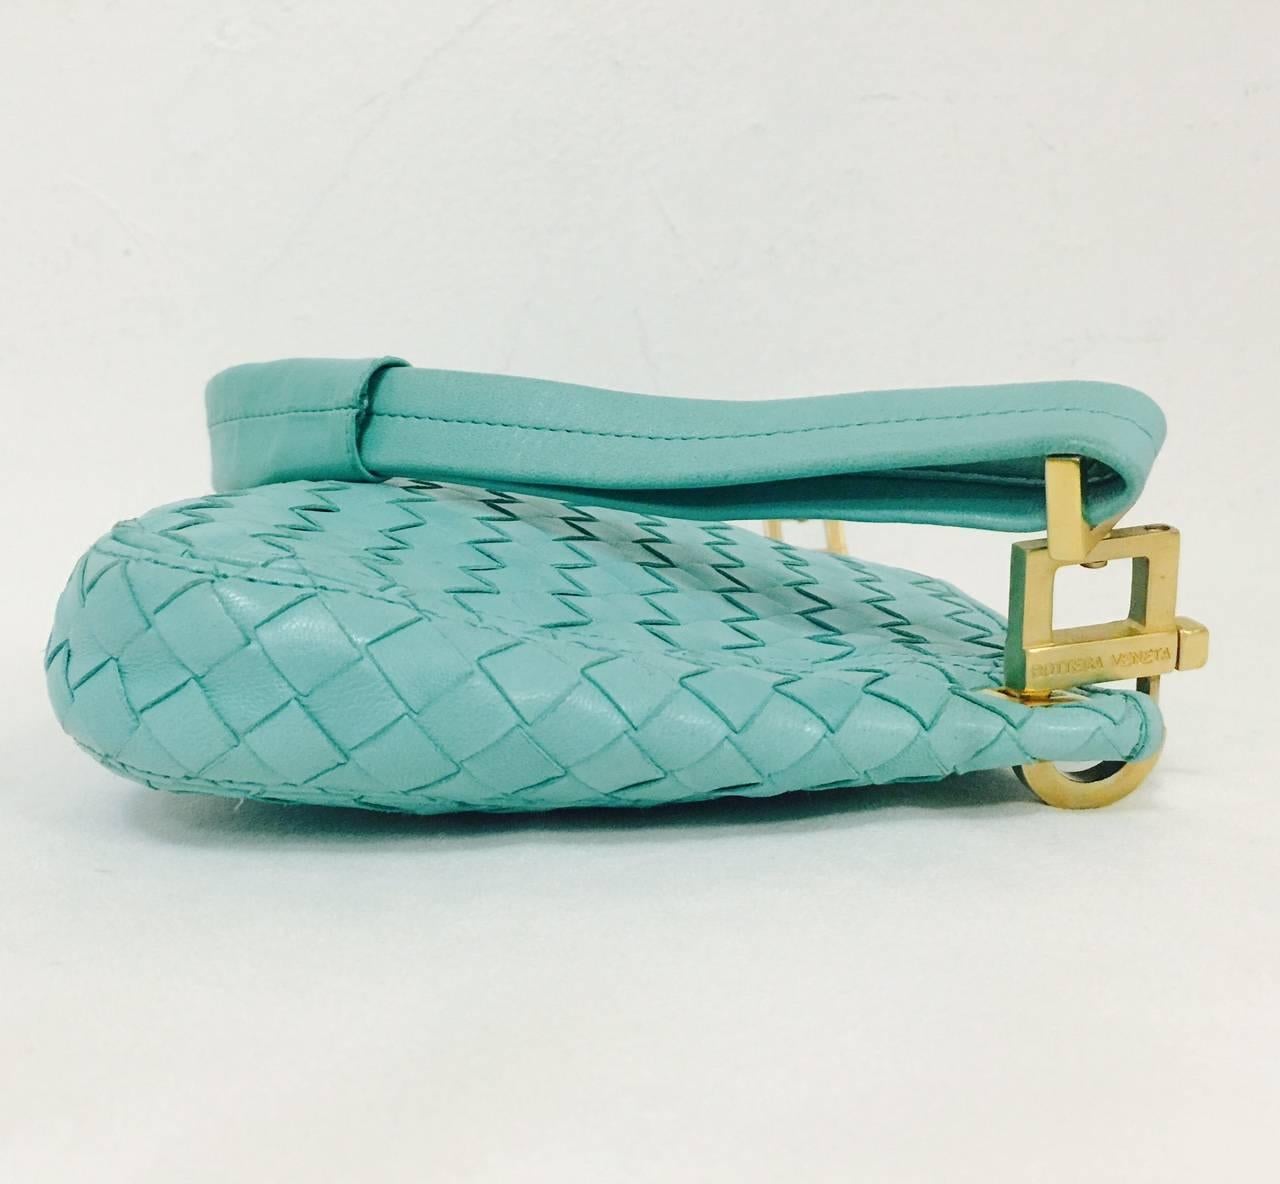 No wonder Bottega Veneta is a favorite of society ladies, fashionistas, and celebrities alike! This Mint Blue/ Green shoulder bag features signature 